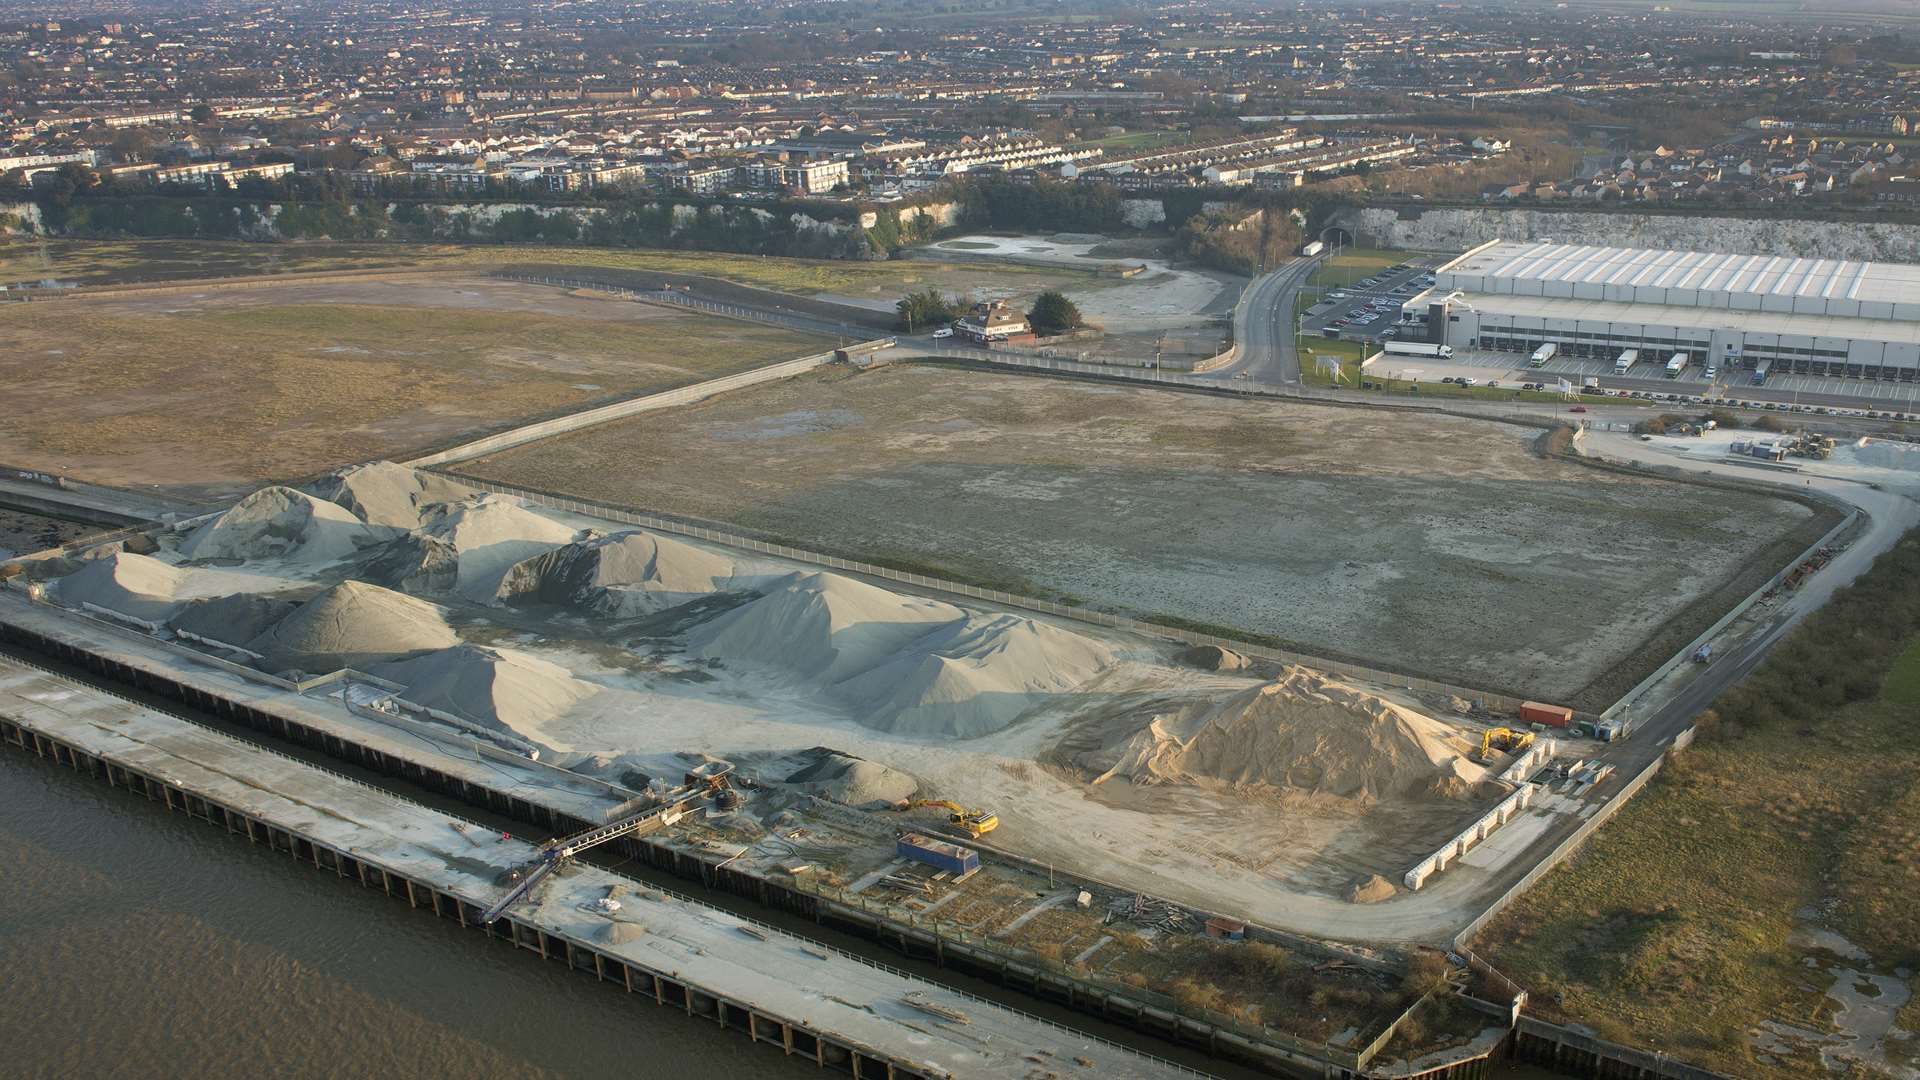 Ebbsfleet Development Corporation has approved plans to build commercial space at Northfleet Embankment East on the banks of the River Thames